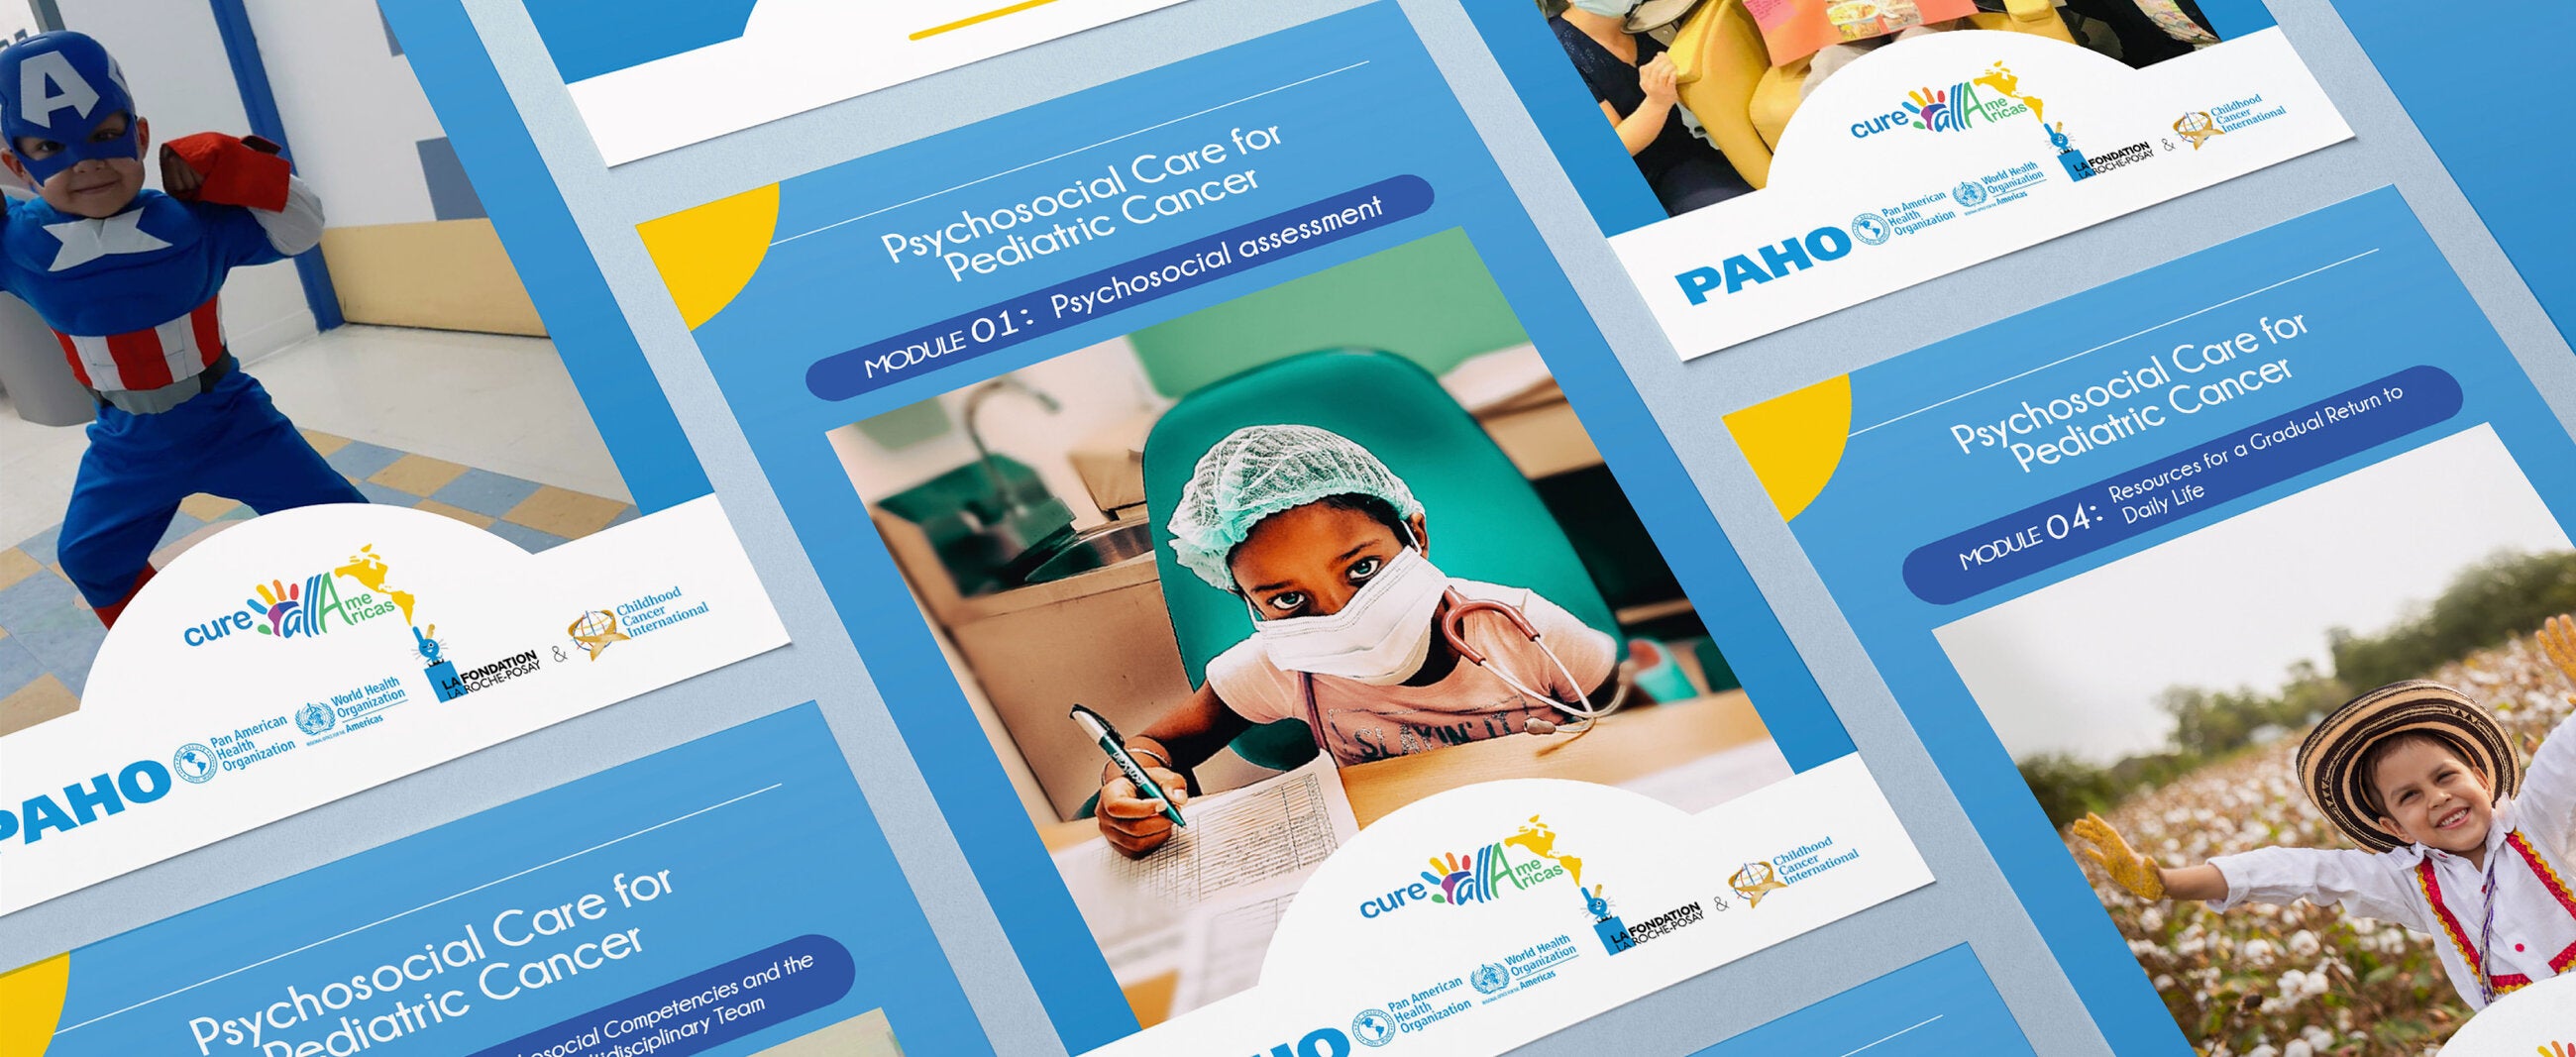 Covers modules of psychosocial care for pediatric cancer